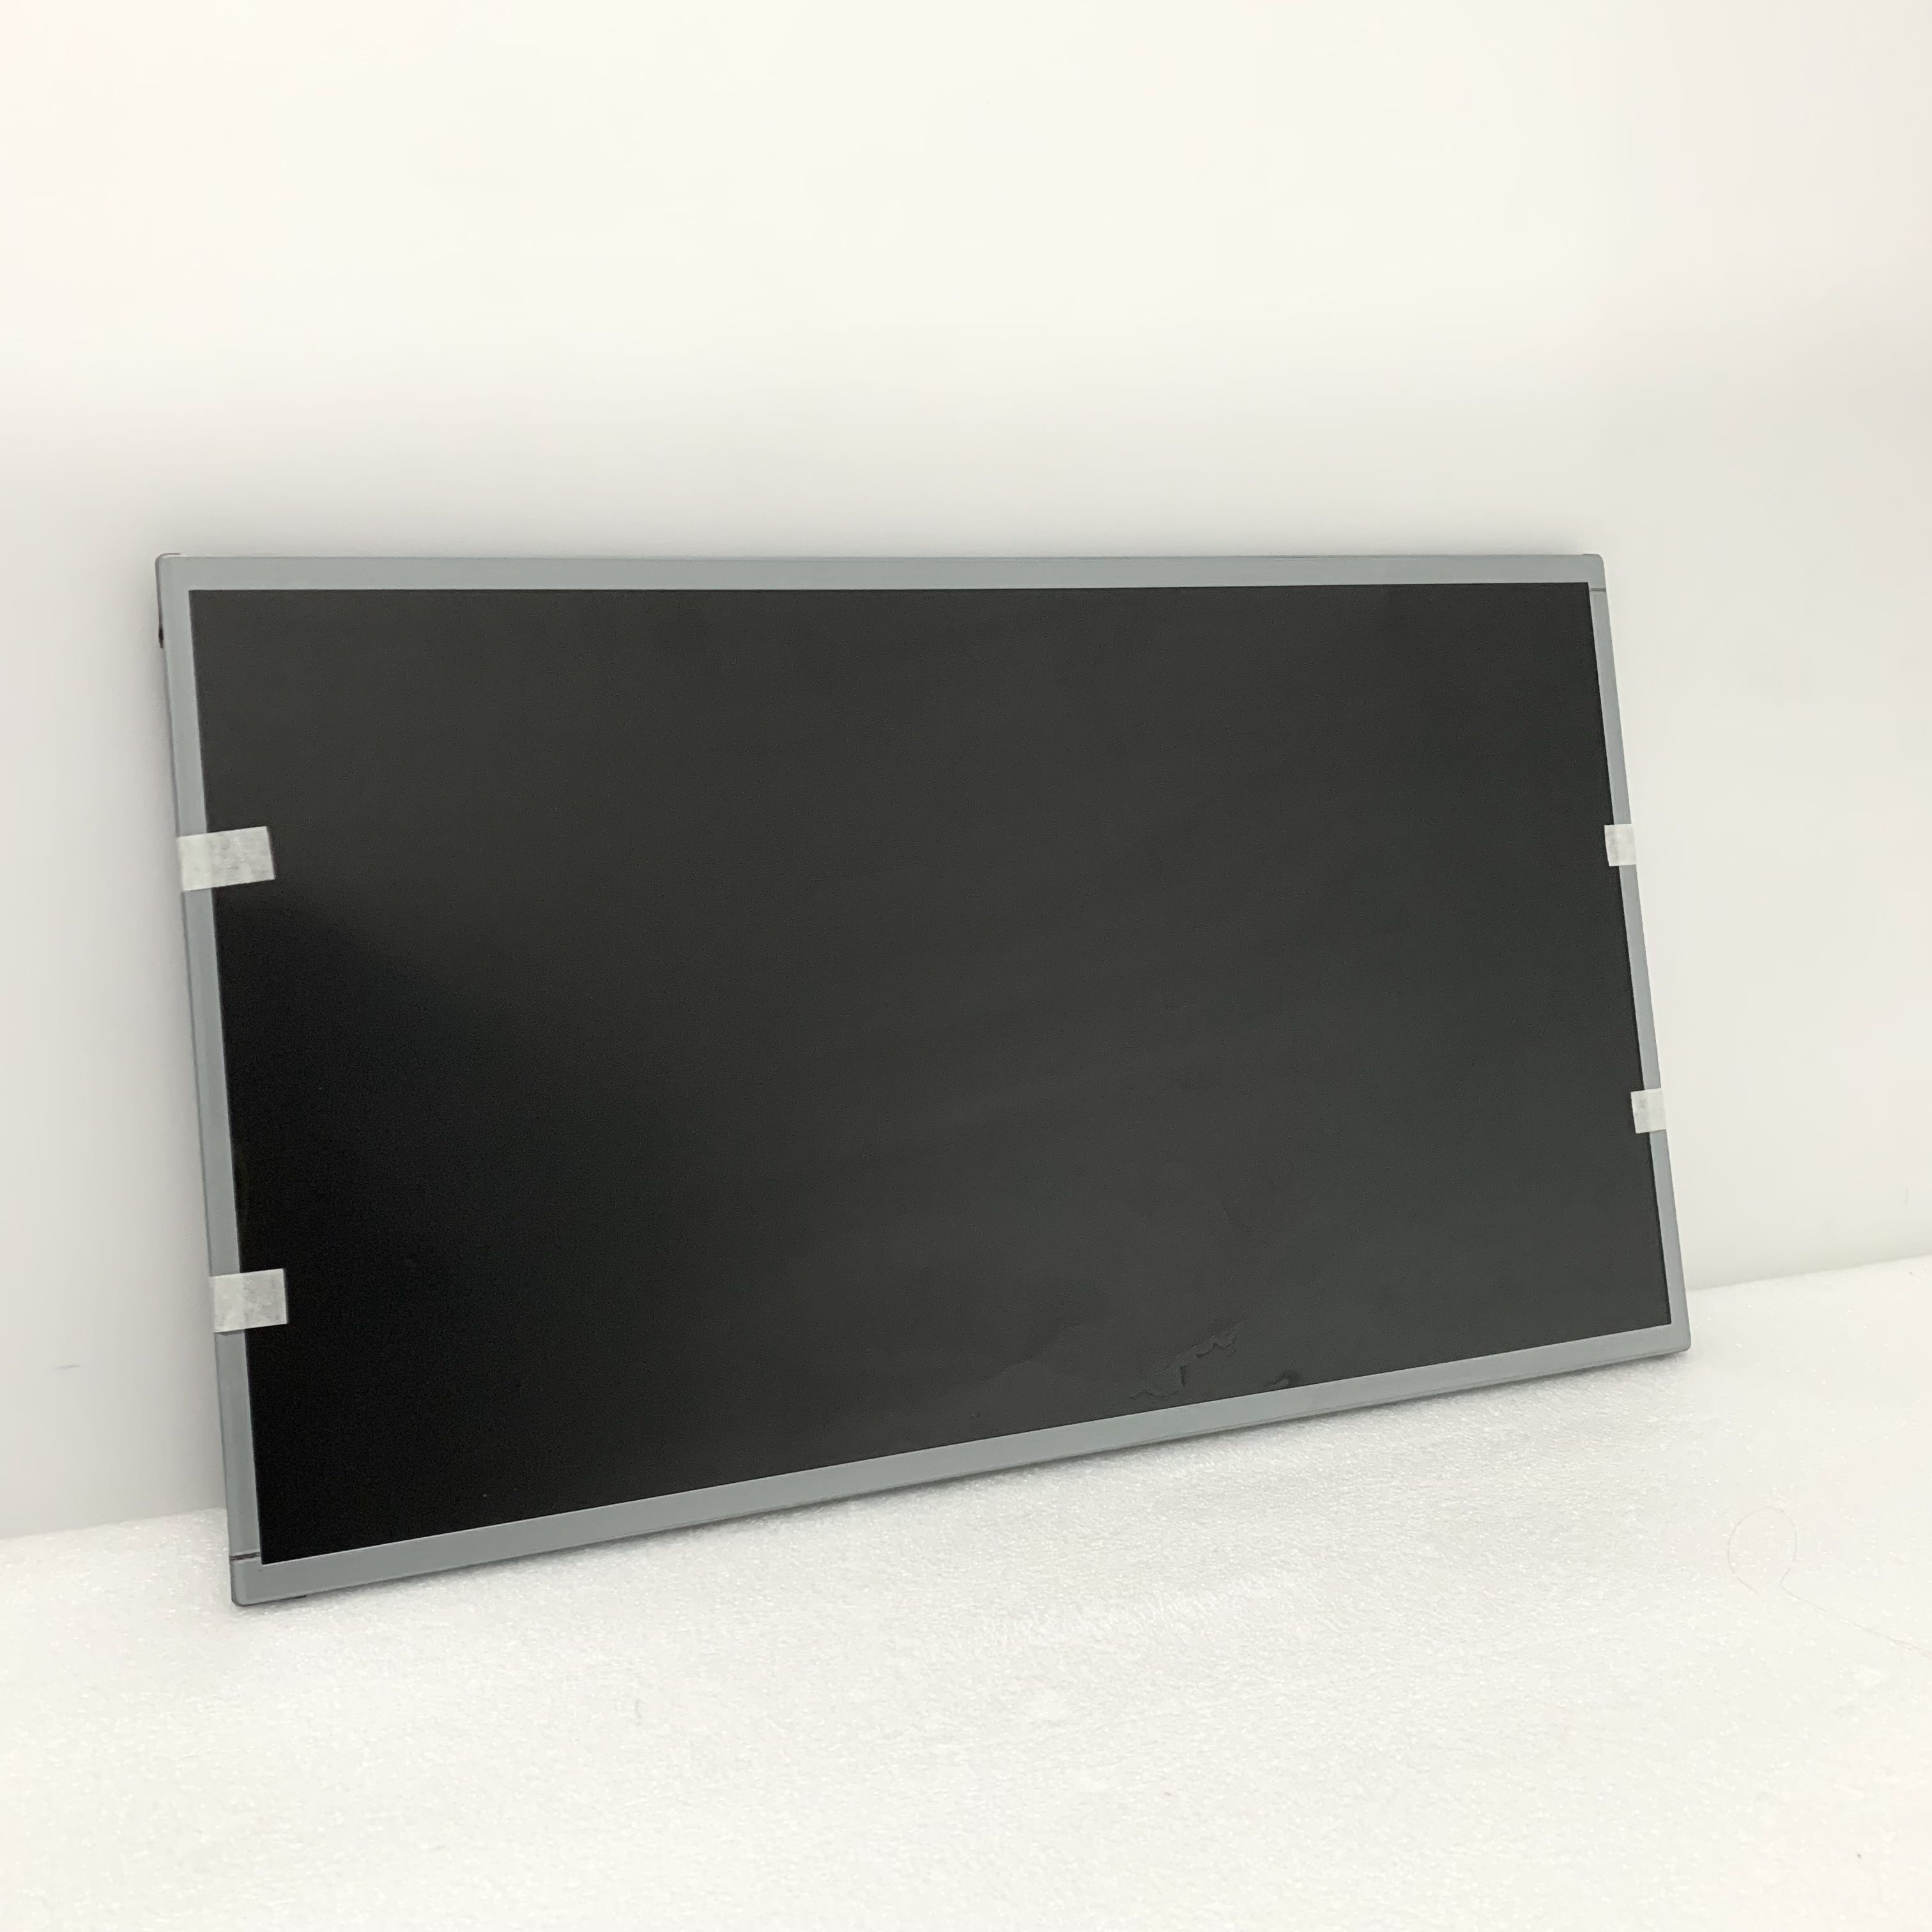 New and Original 21.5 inch IPS Lcd Screen 1920x1080 Outdoor High Brightness Sunlight Readable LCD Display